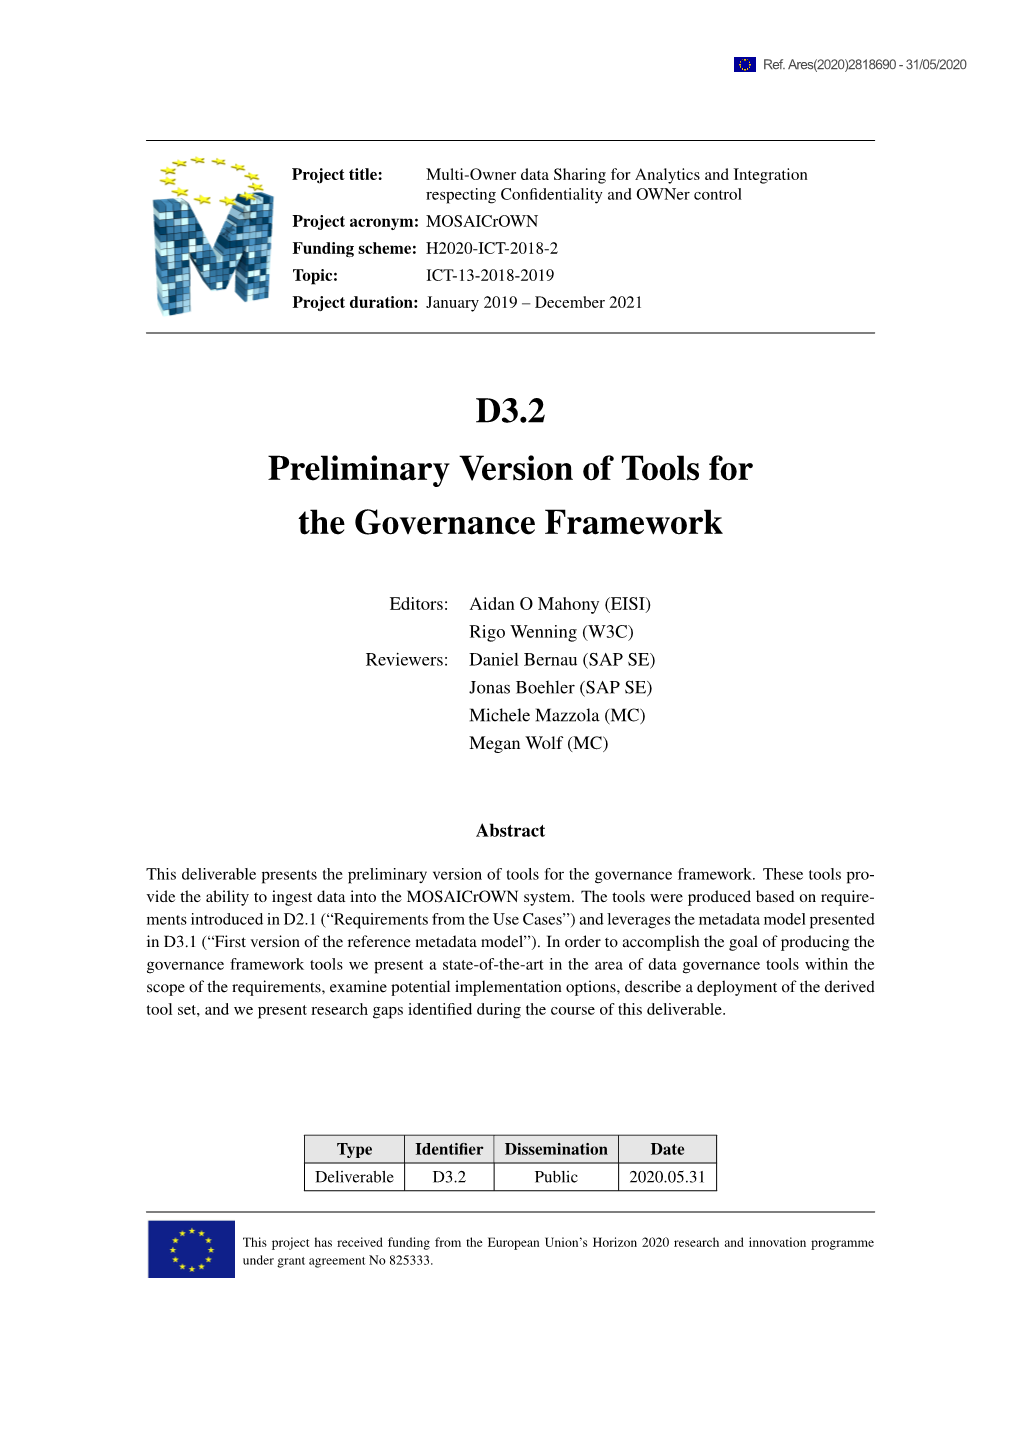 D3.2 Preliminary Version of Tools for the Governance Framework